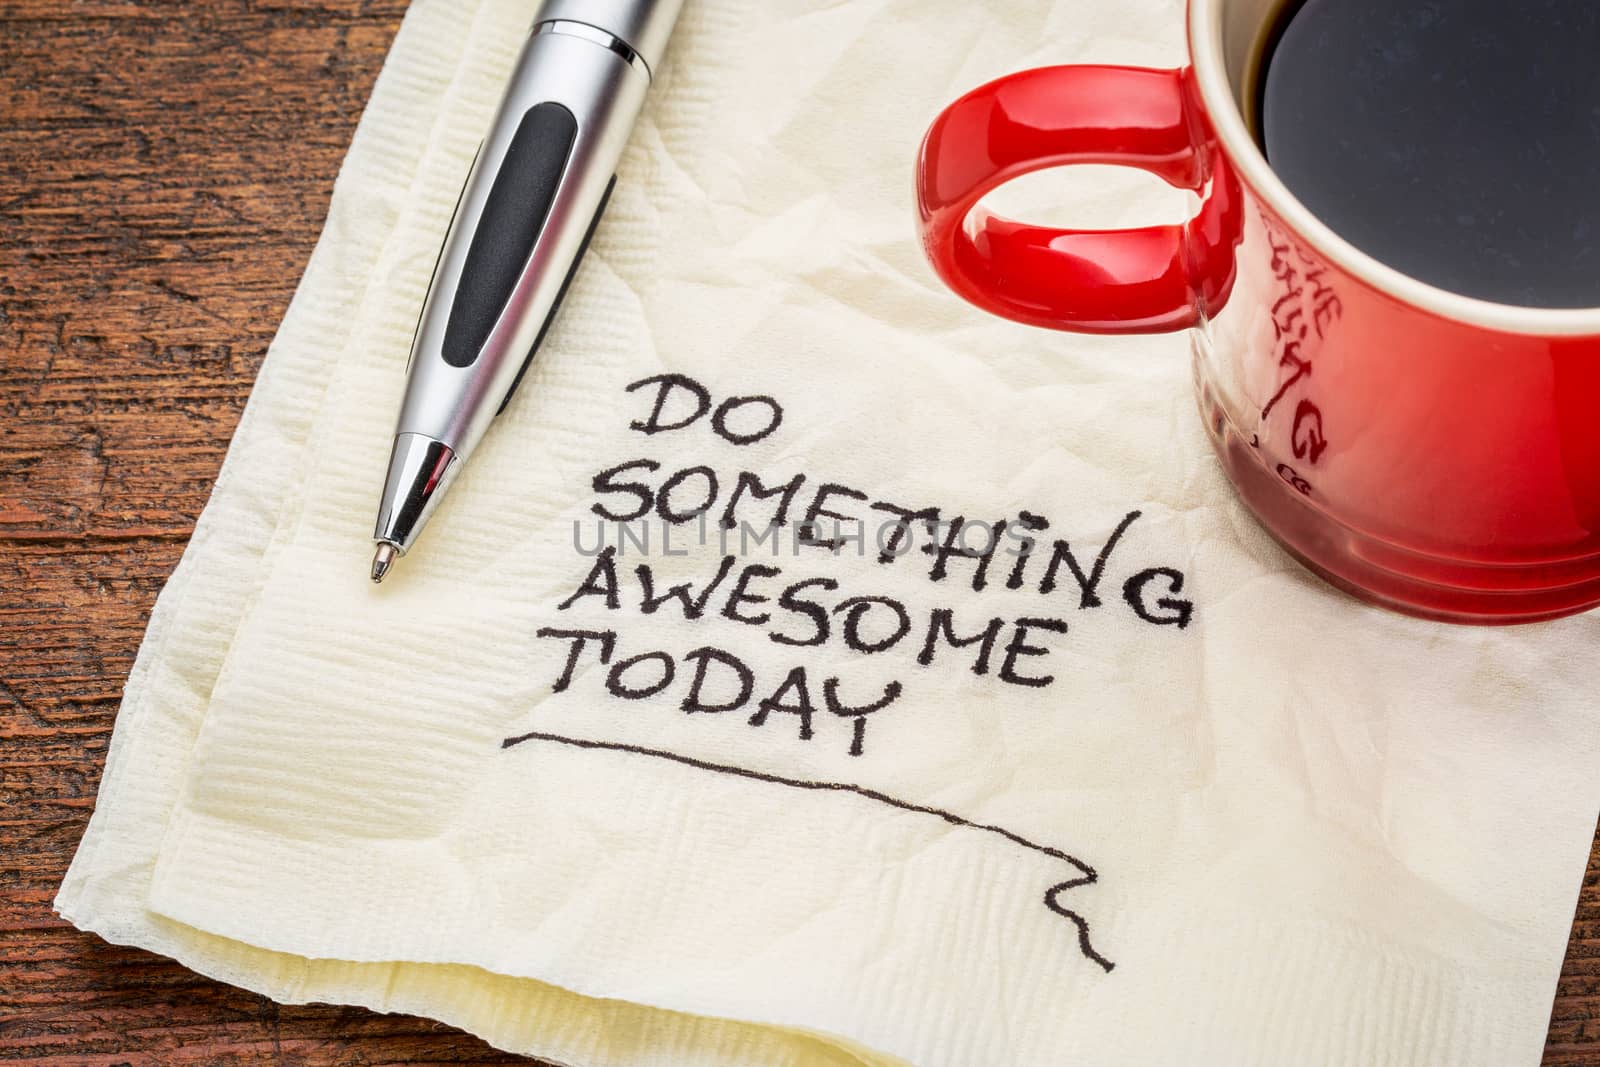 do something awesome today by PixelsAway